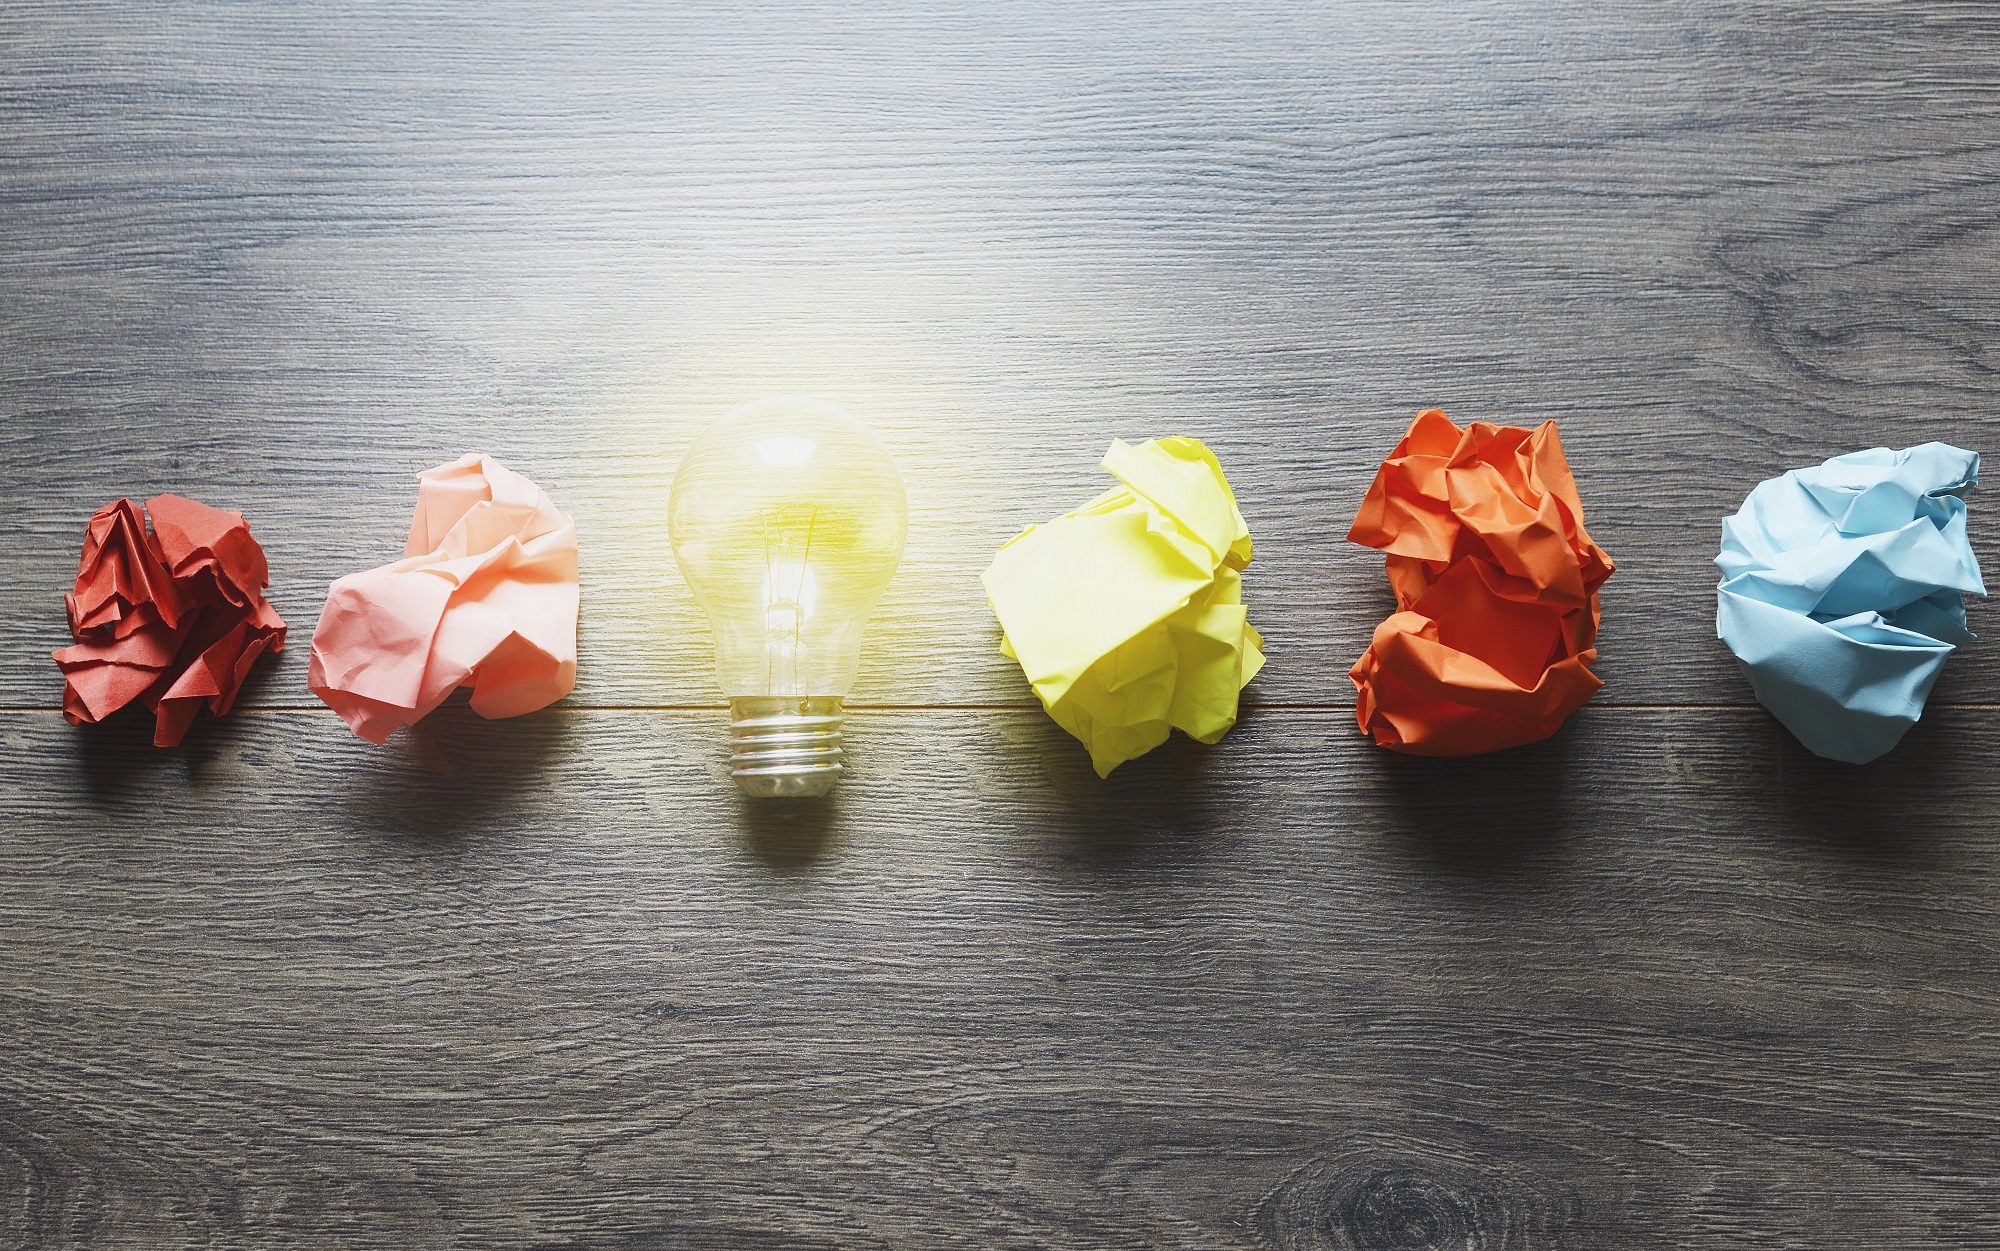 A stock image of crumpled up pieces of multicolored paper in a horizontal line with a lit up lightbulb between two of the pieces of paper